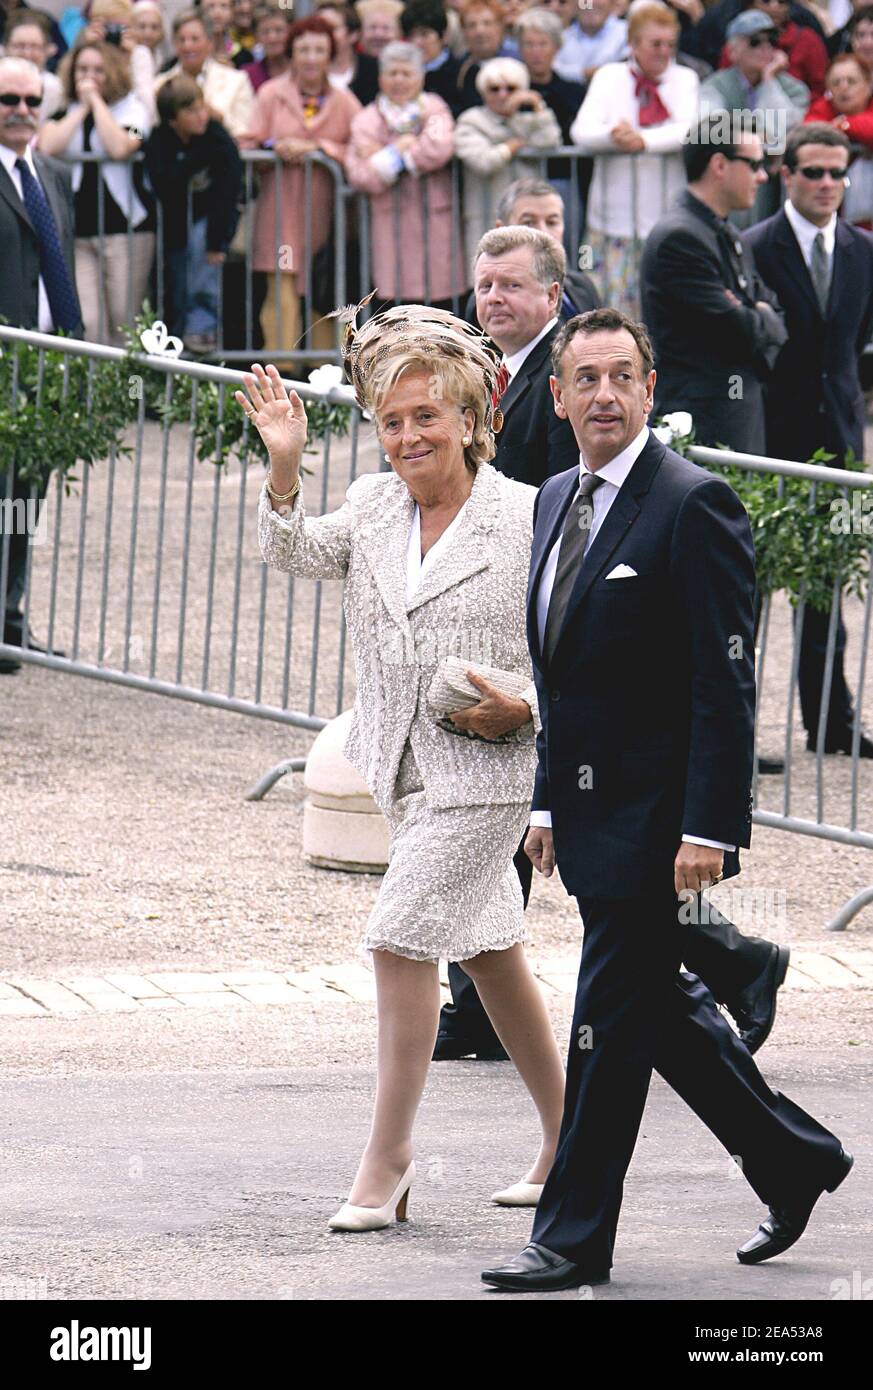 French First Lady Bernadette Chirac attends the wedding of Delphine Arnault and Alessandro Gancia in Bazas, South West of France on September 17, 2005. Photo by ABACAPRESS.COM. Stock Photo